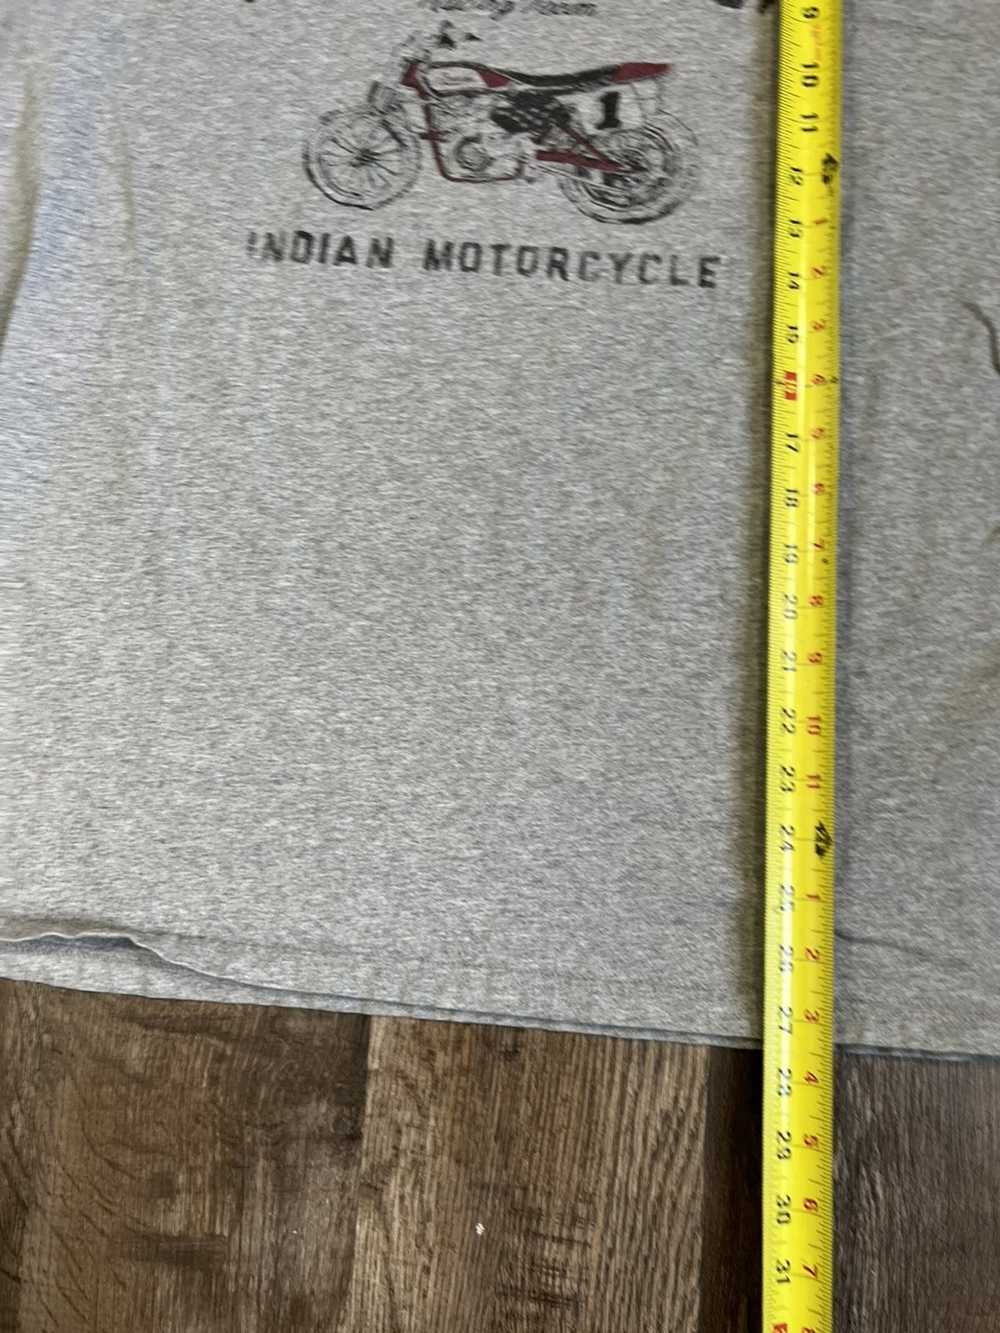 Indian Motercycles Indian Motorcycles Shirt - image 6